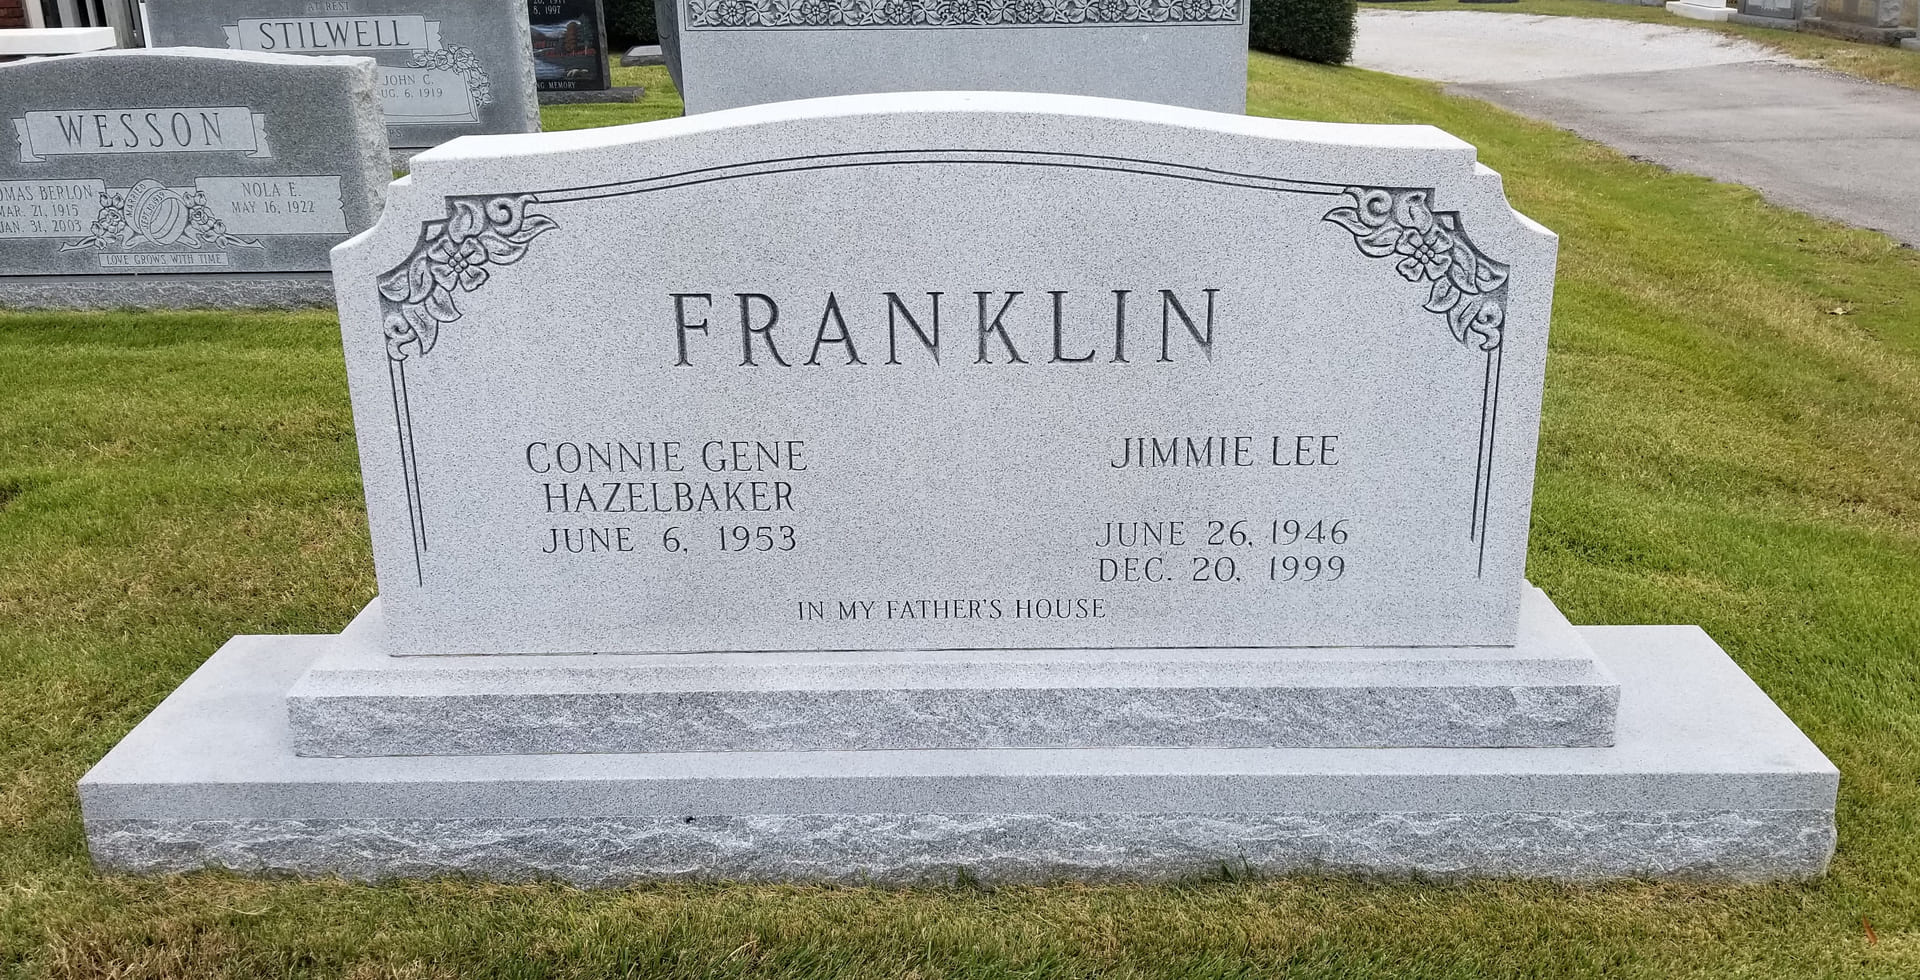 A memorial slab for Connie Gene Hazelbaker and Jimmie Lee